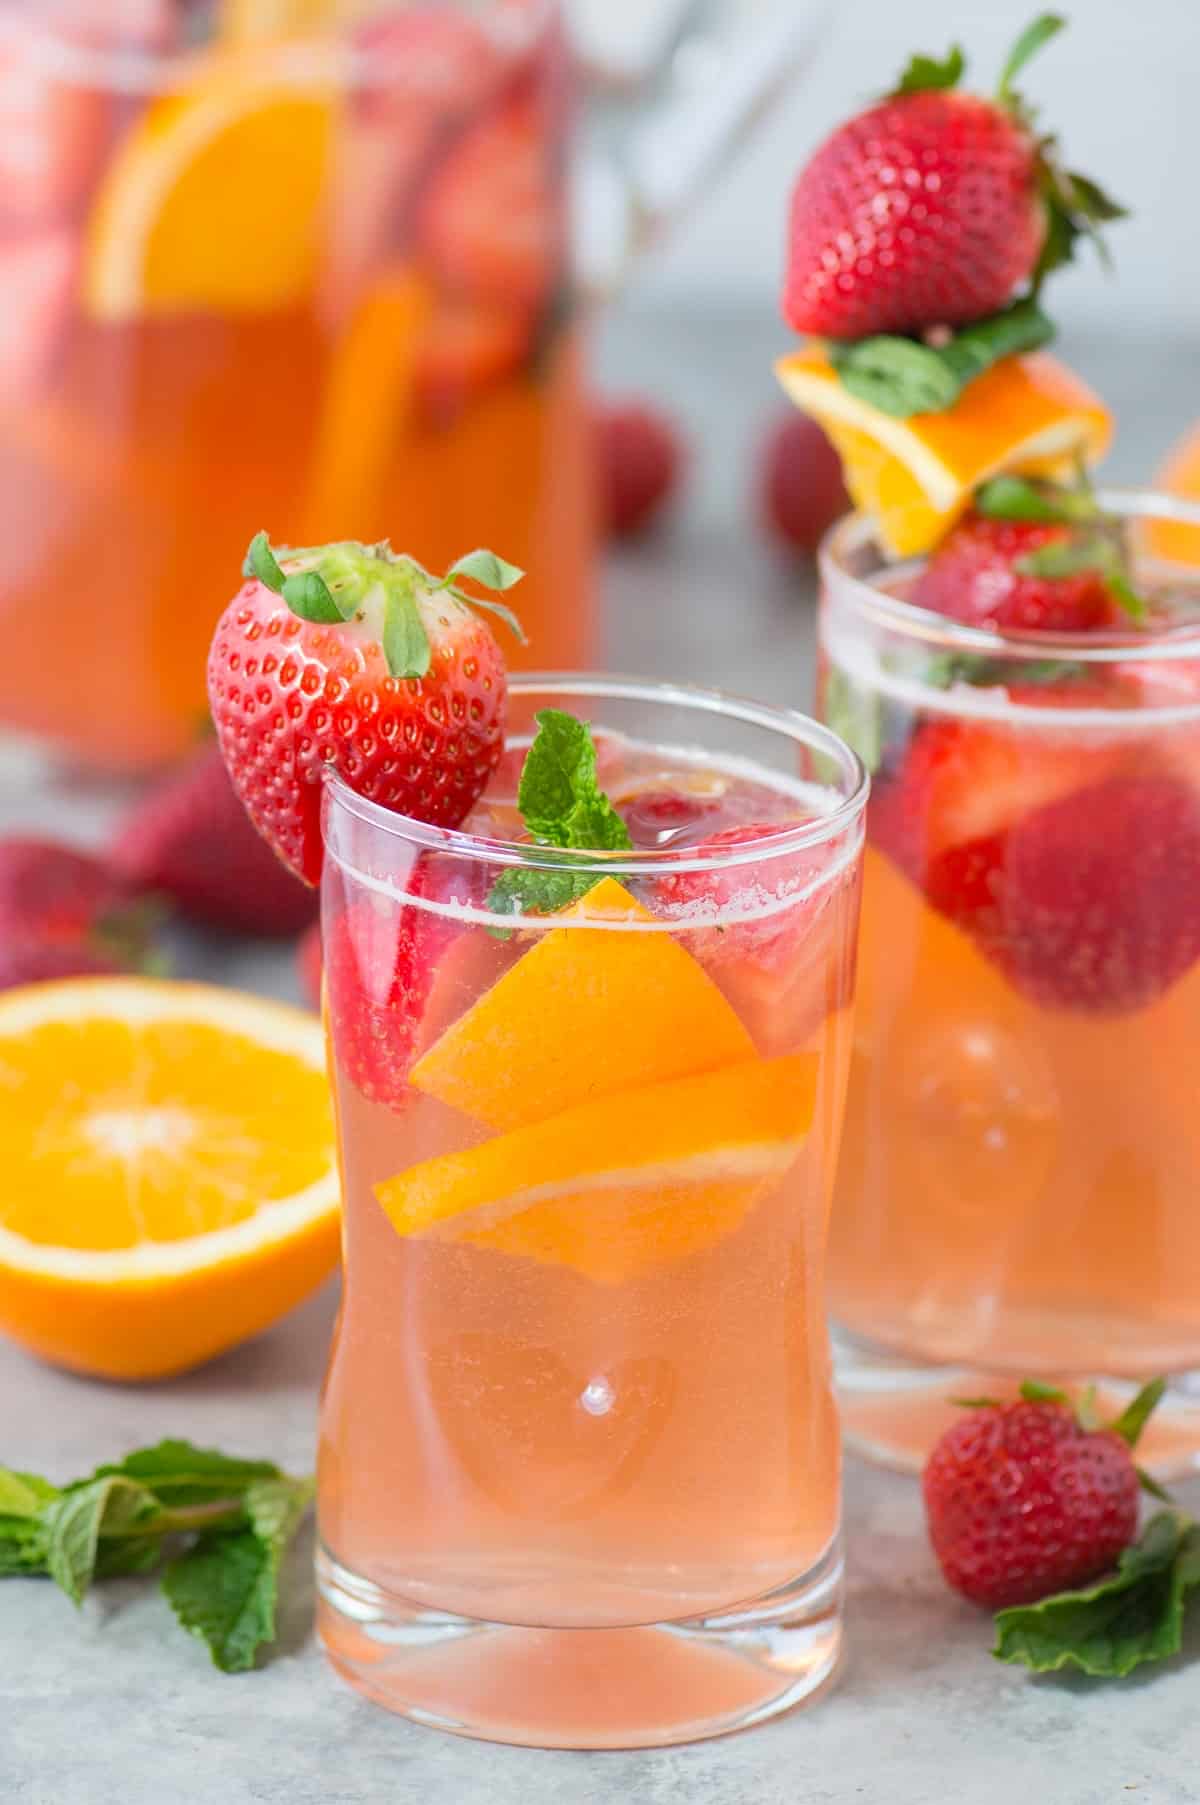 strawberry sangria in clear glass with strawberries, oranges and mint as garnish